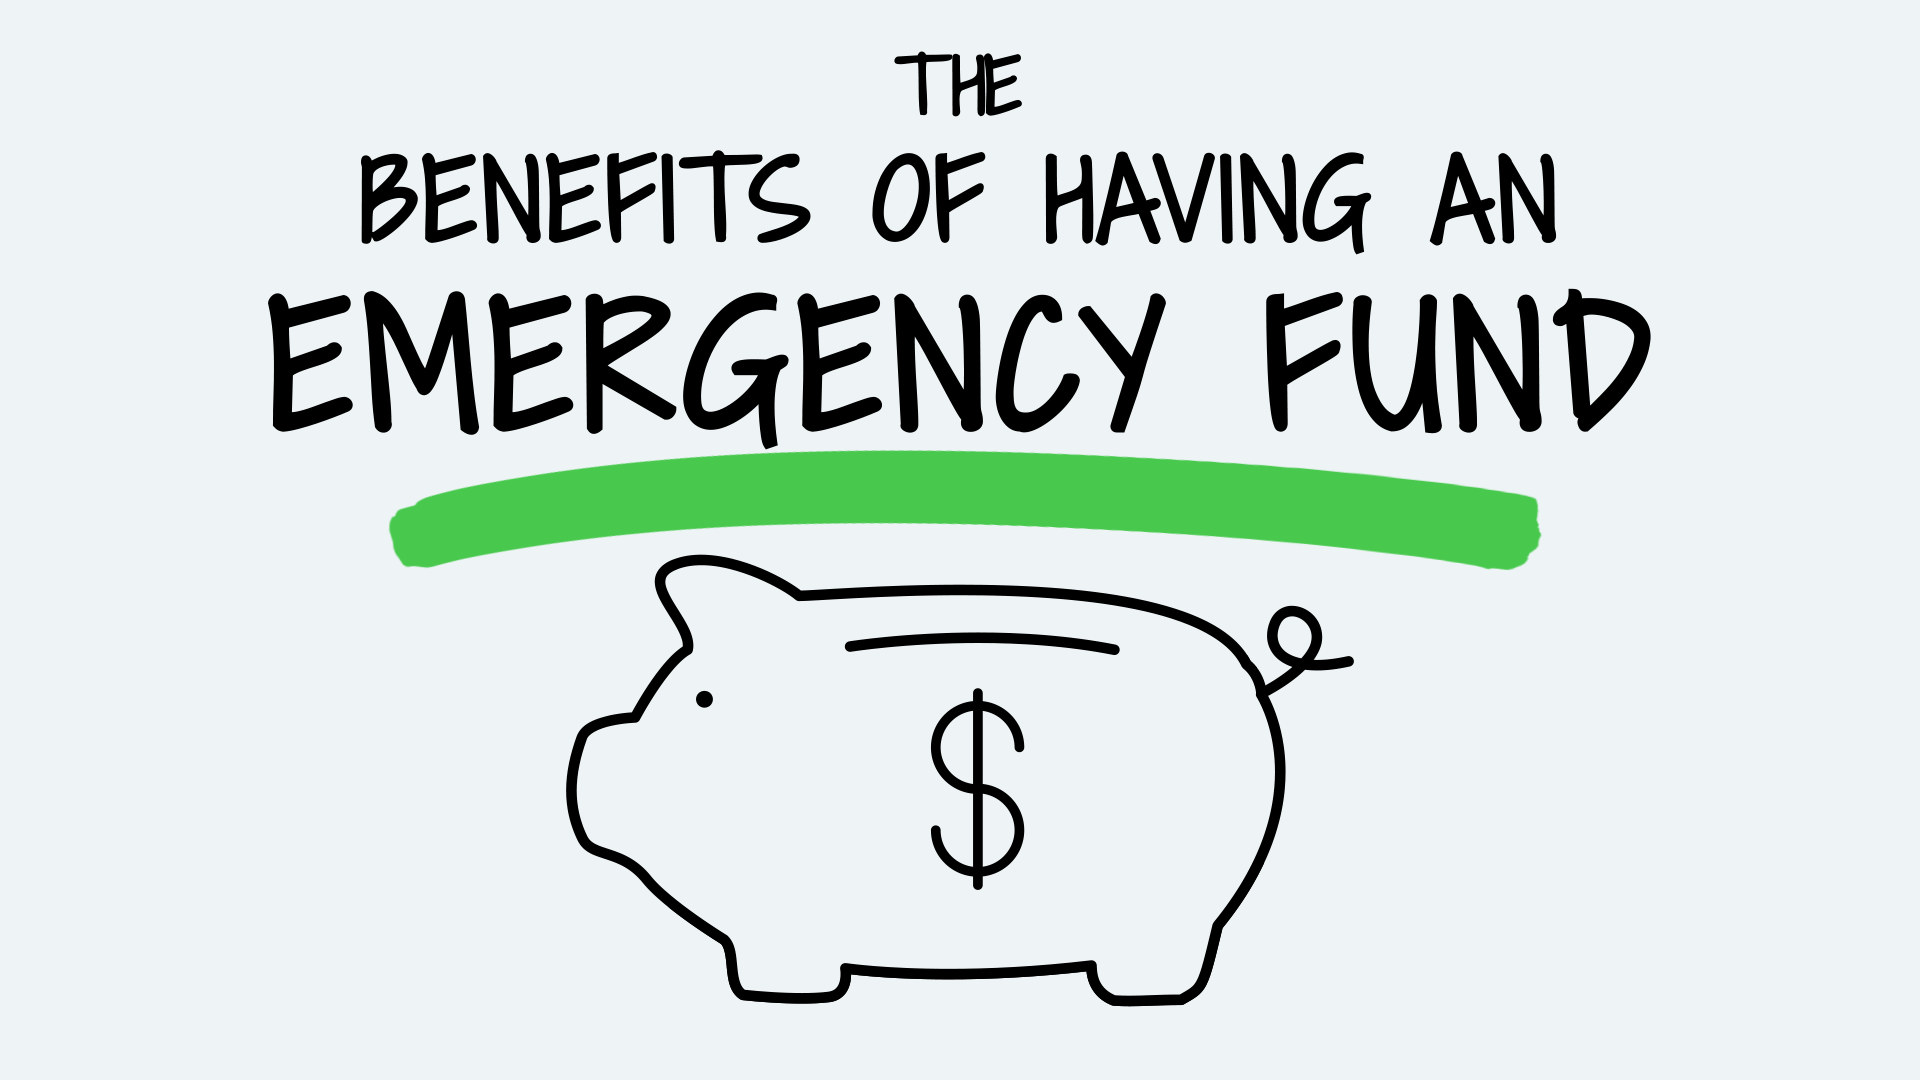 The Benefits of an Emergency Fund